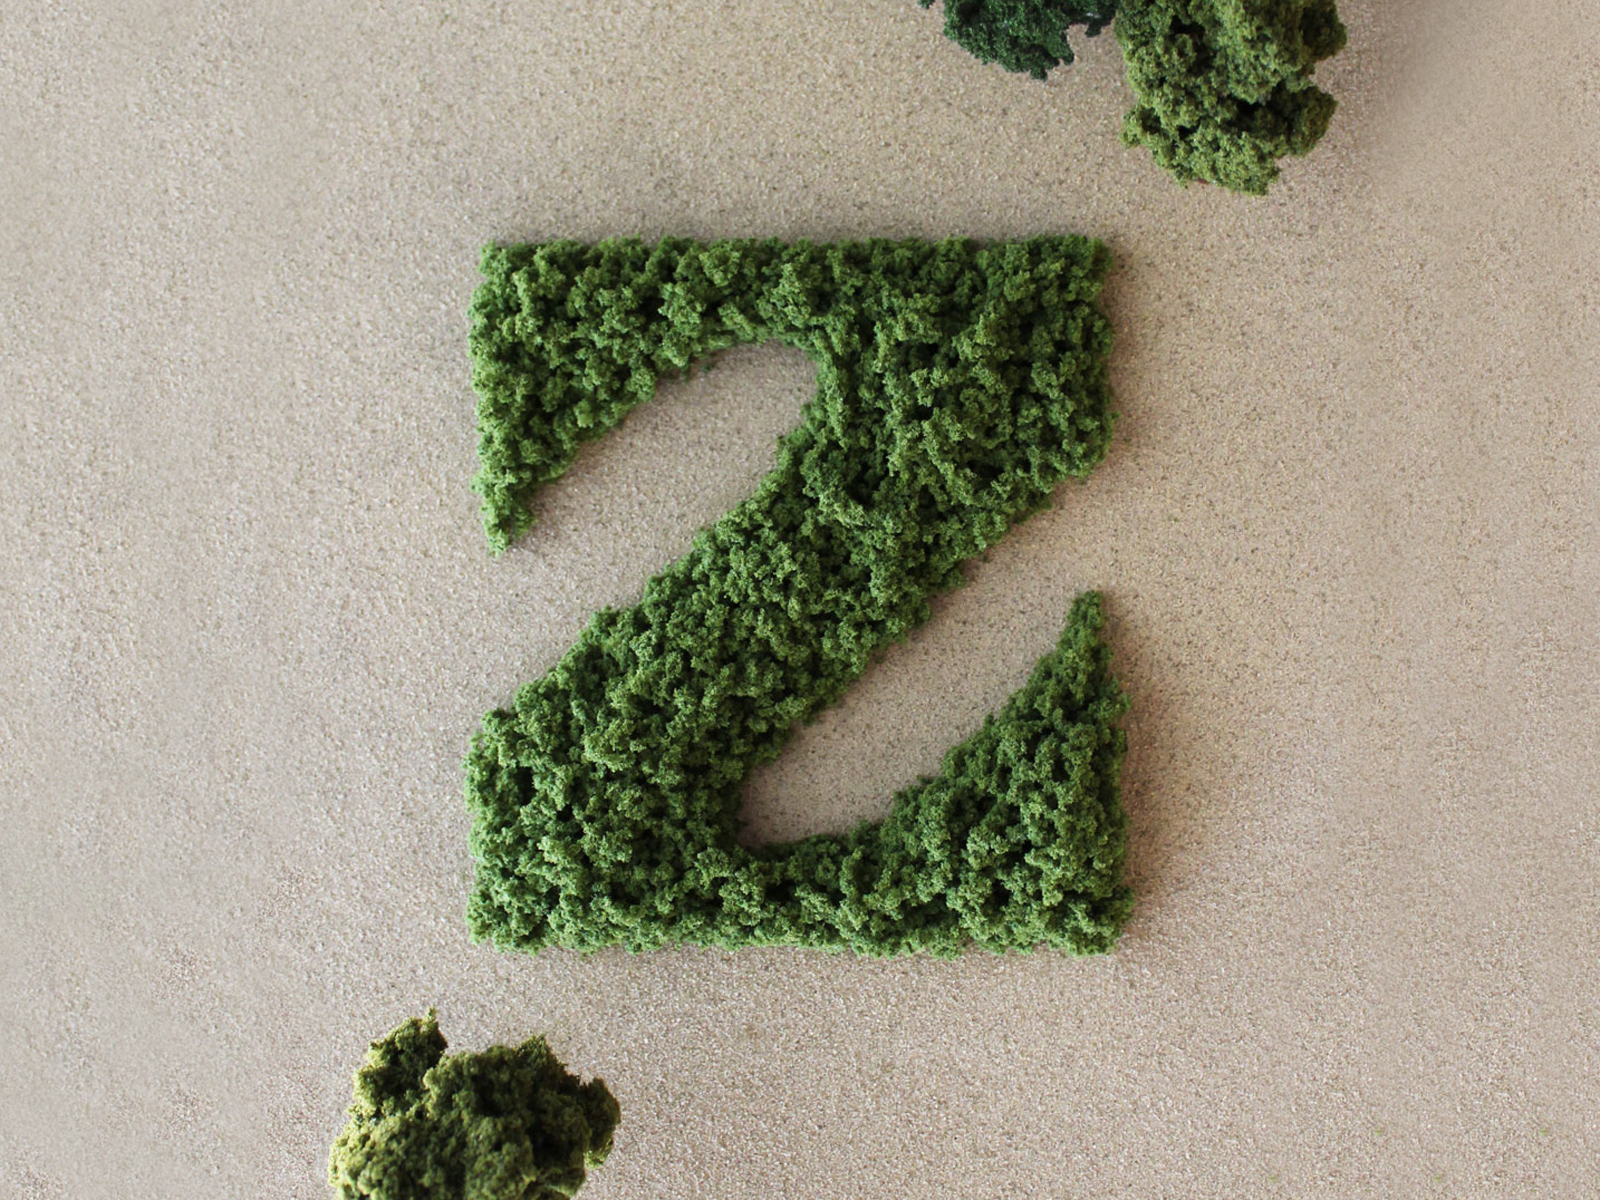 Z is for Zen - 36 Days of Type 36 days of type craft garden green handlettering handmade leaf moss nature physical sand tactile trees type typography zen